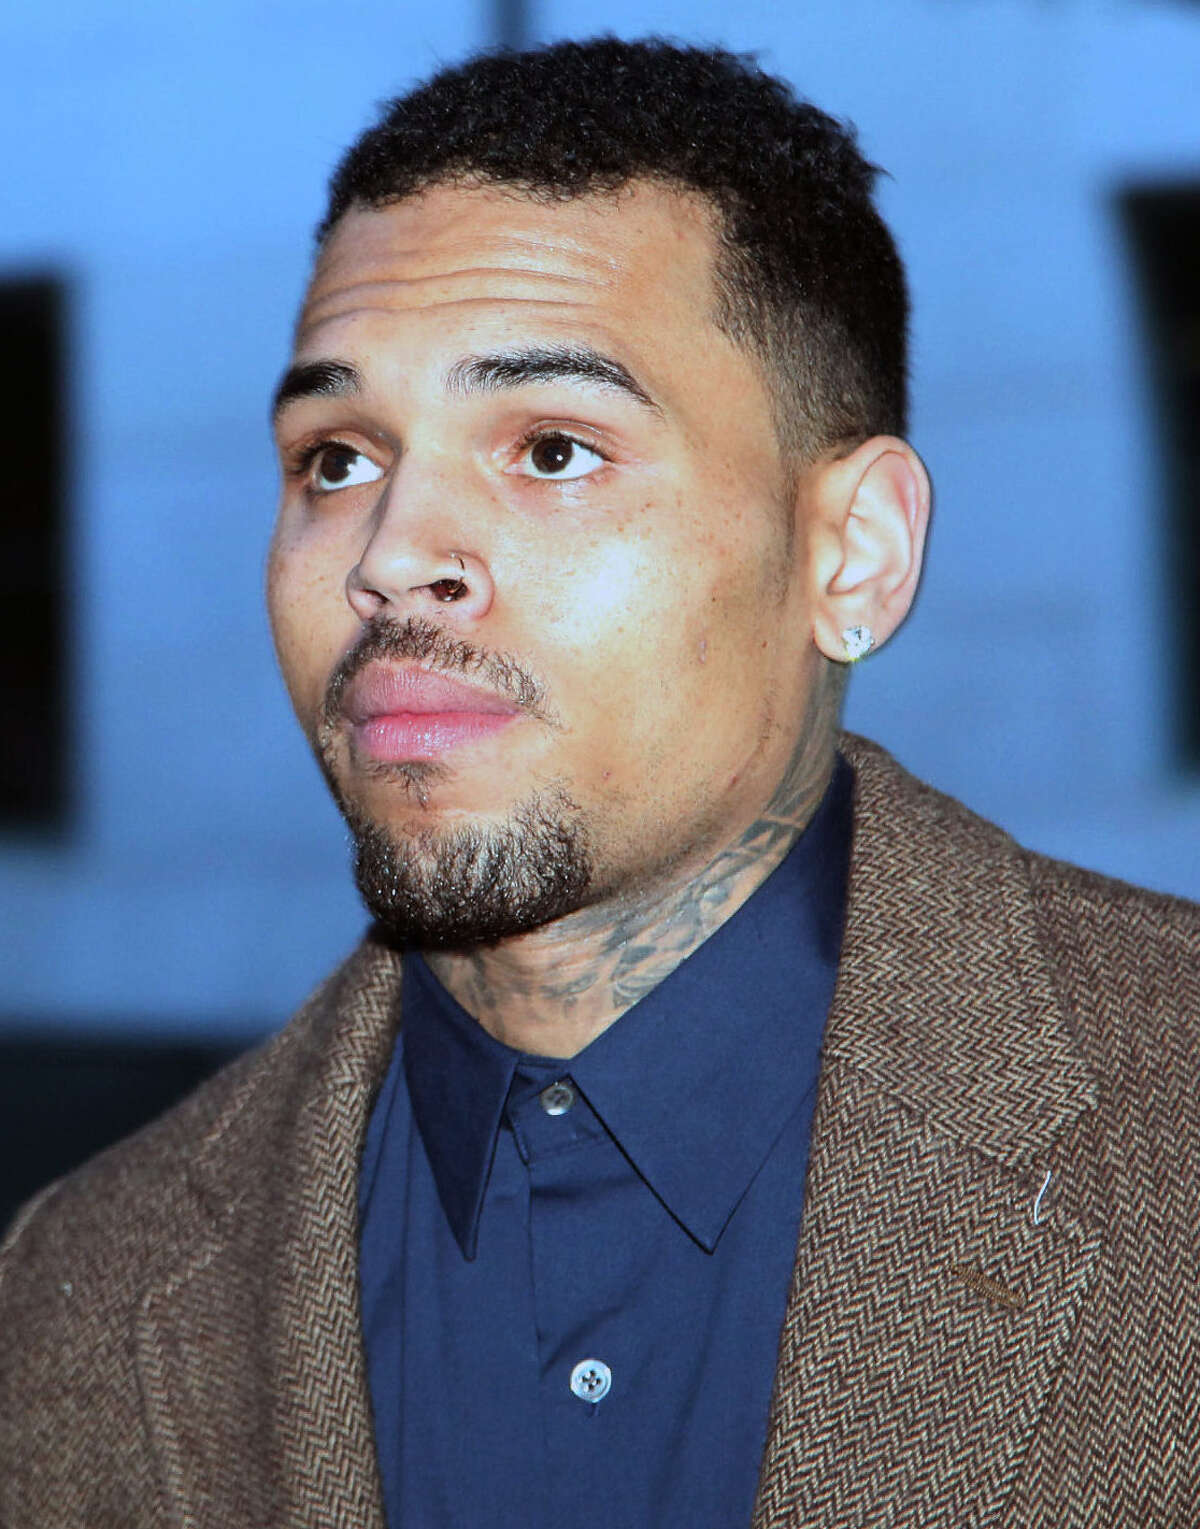 Singer Chris Brown managed to avoid jail over a misdemeanor assault case, for now.